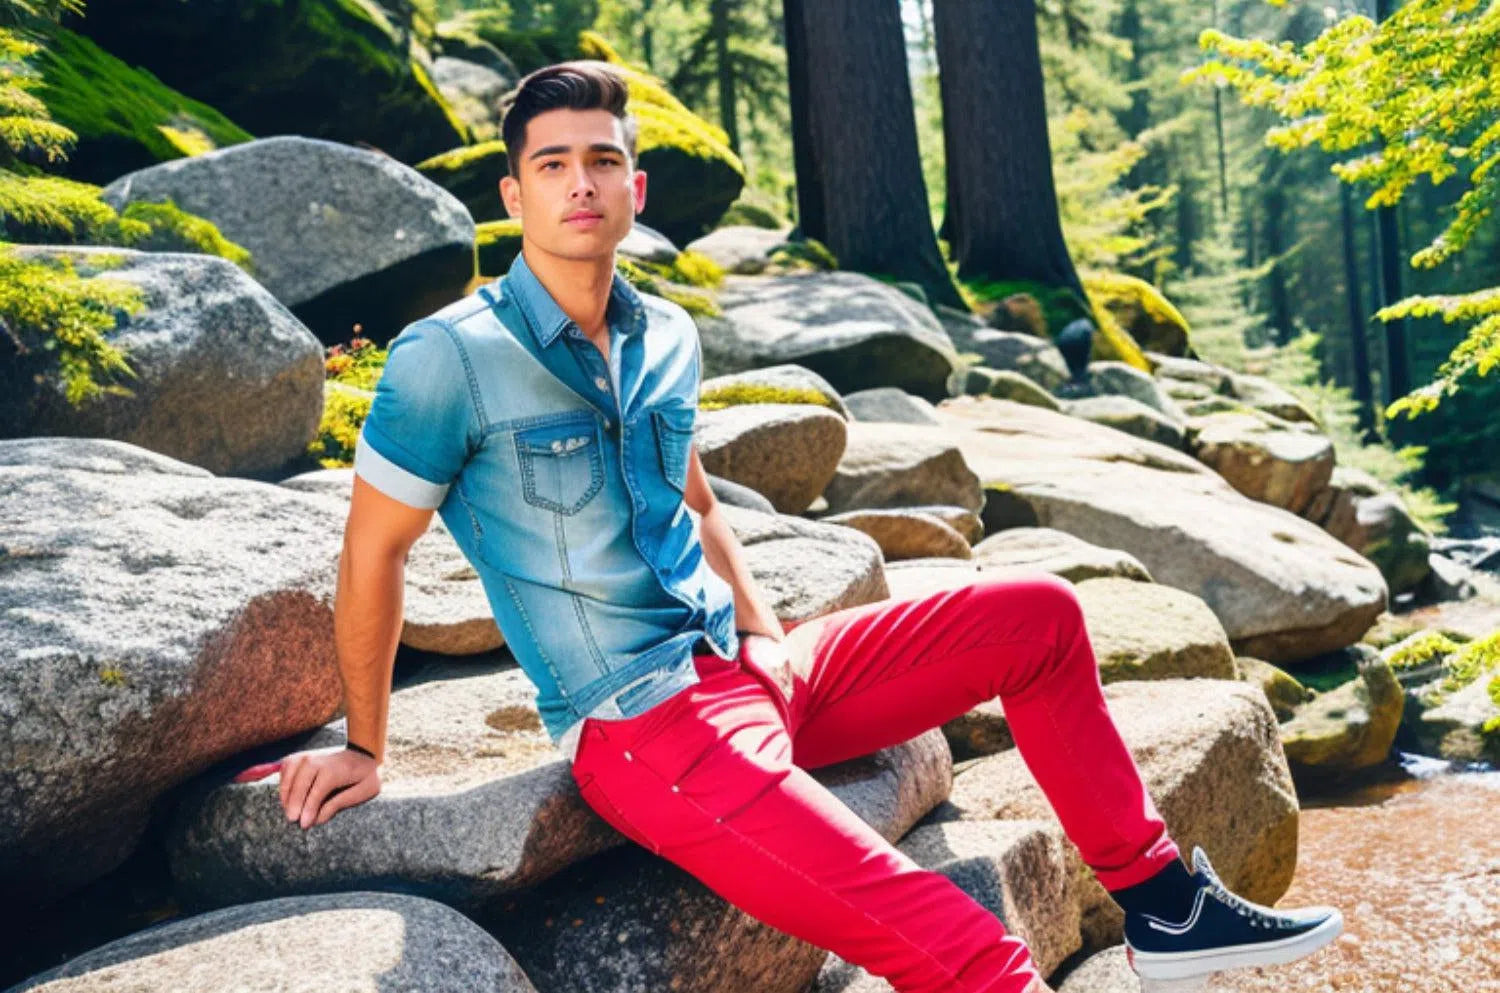 Spring-Summer Wardrobe with Men's Red Jeans | Jeans4you.shop